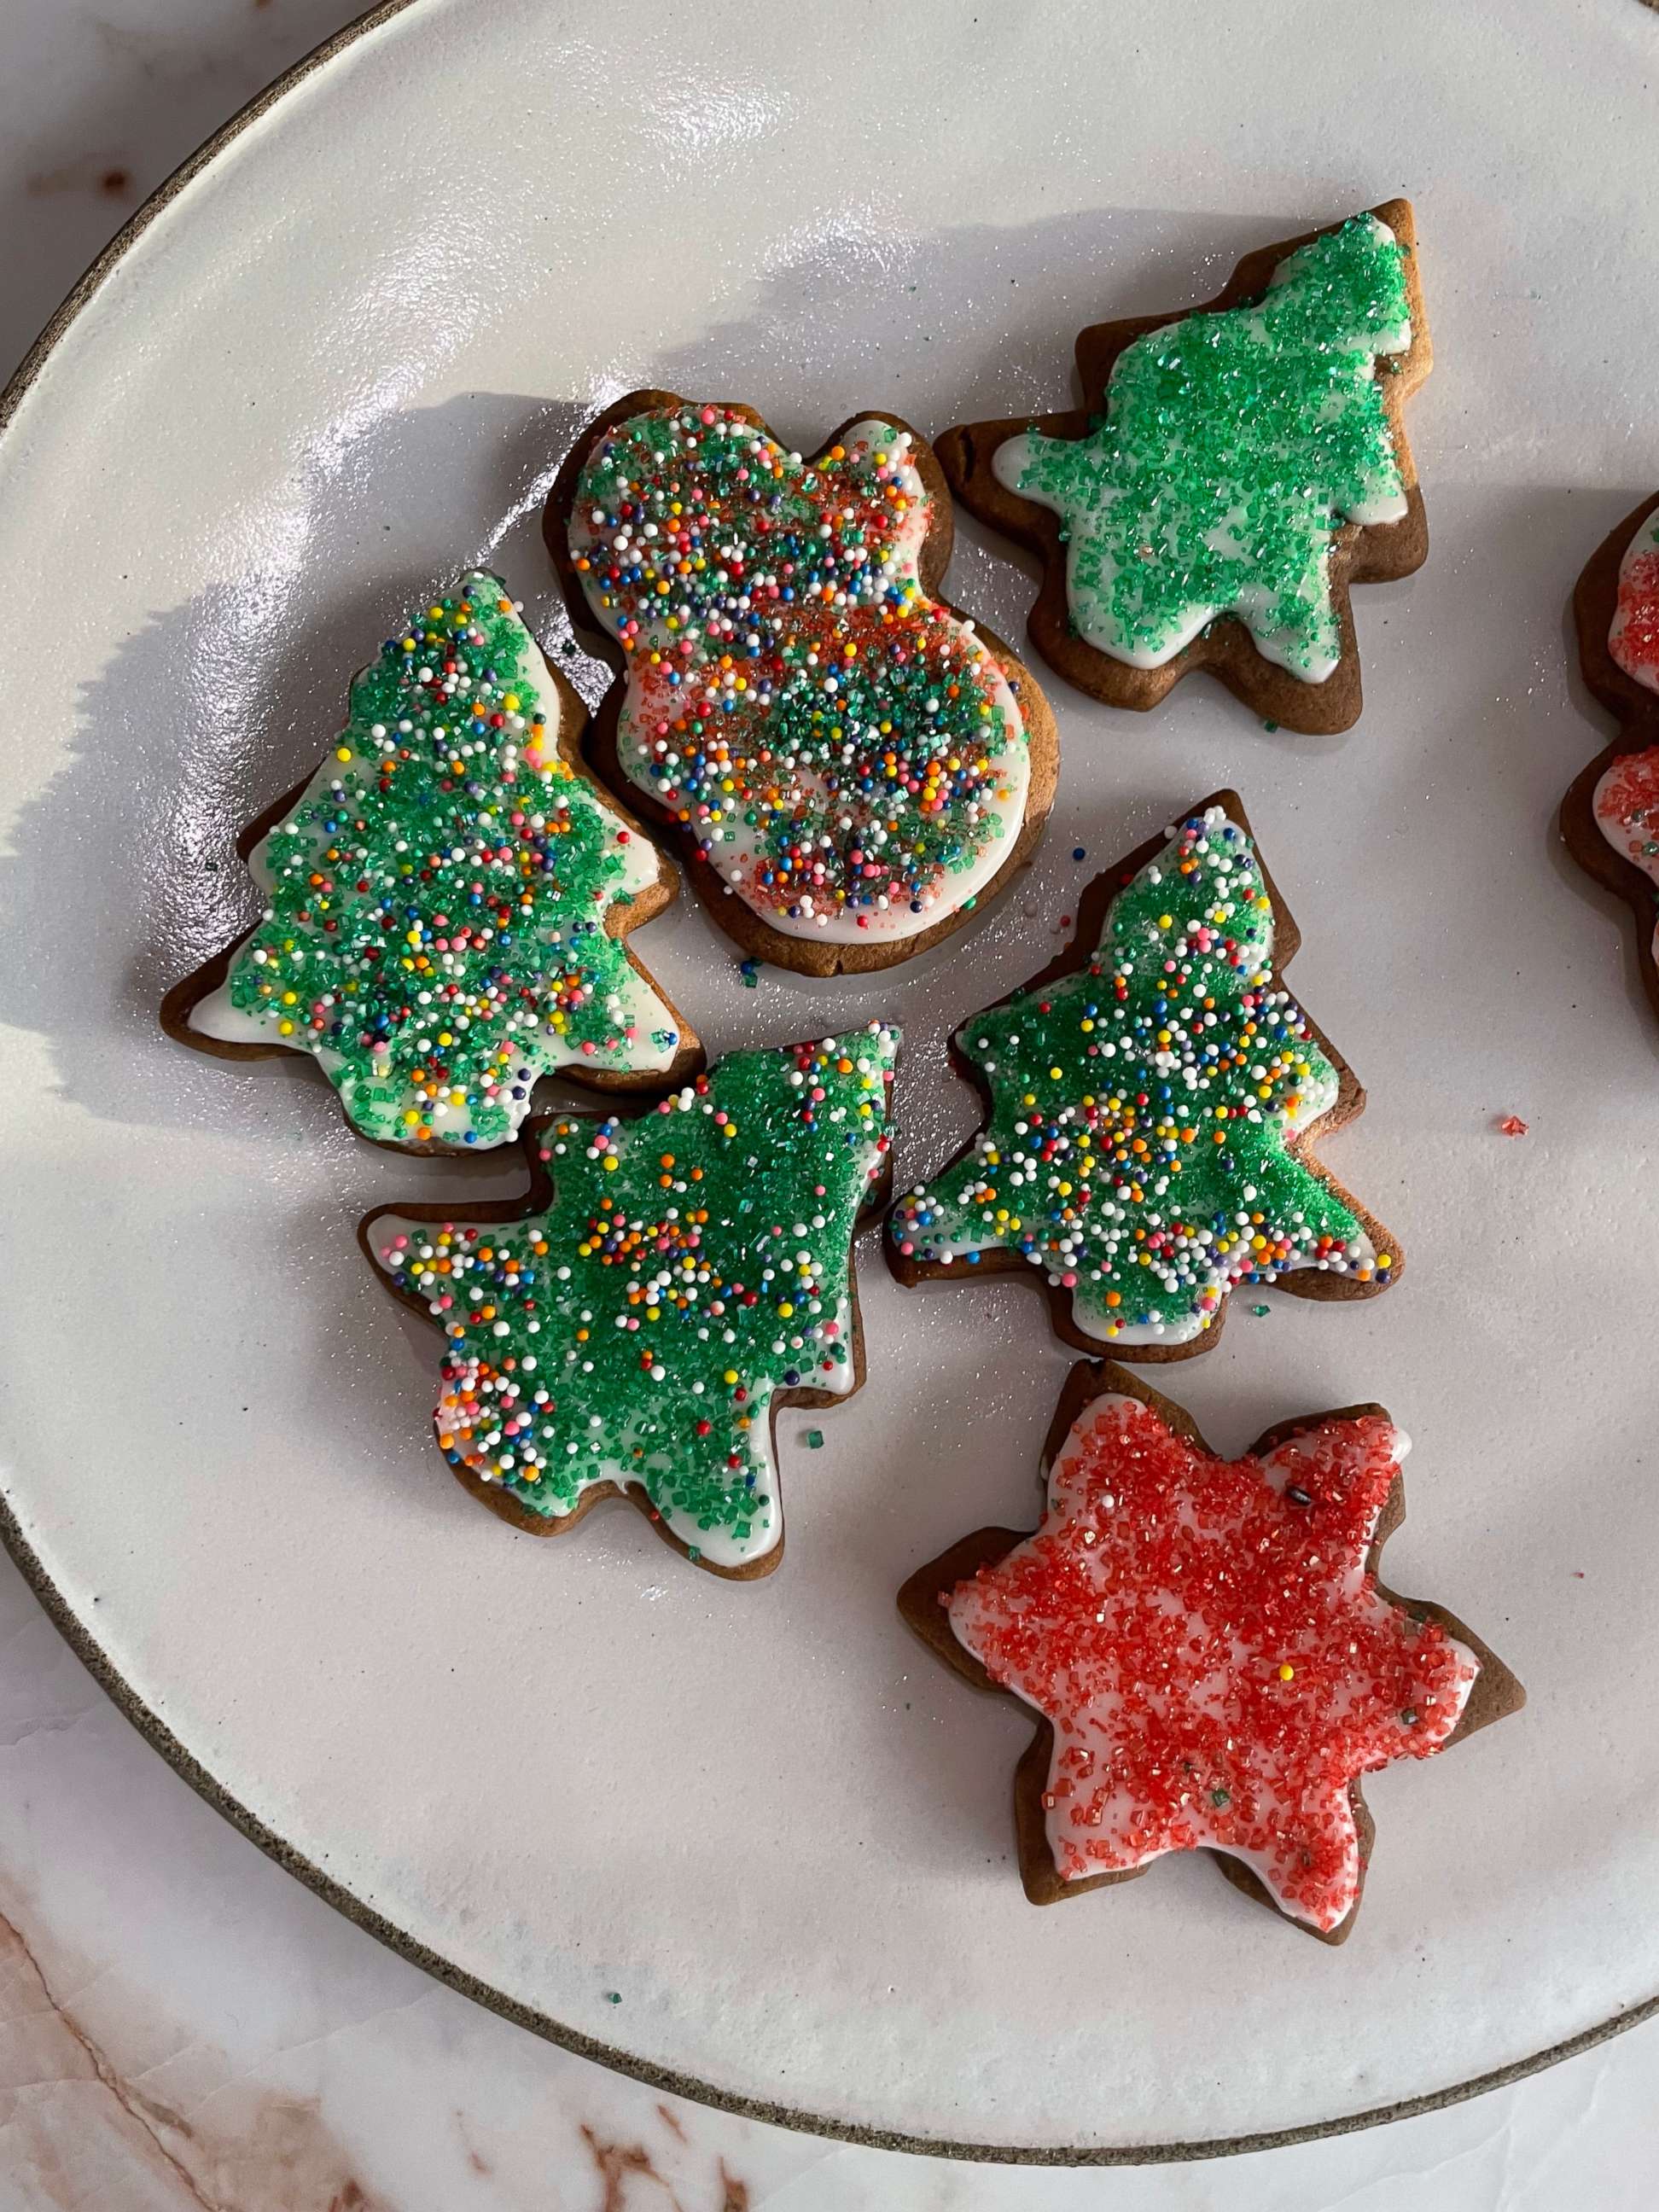 PHOTO: Gingerbread cookies with citrus icing.